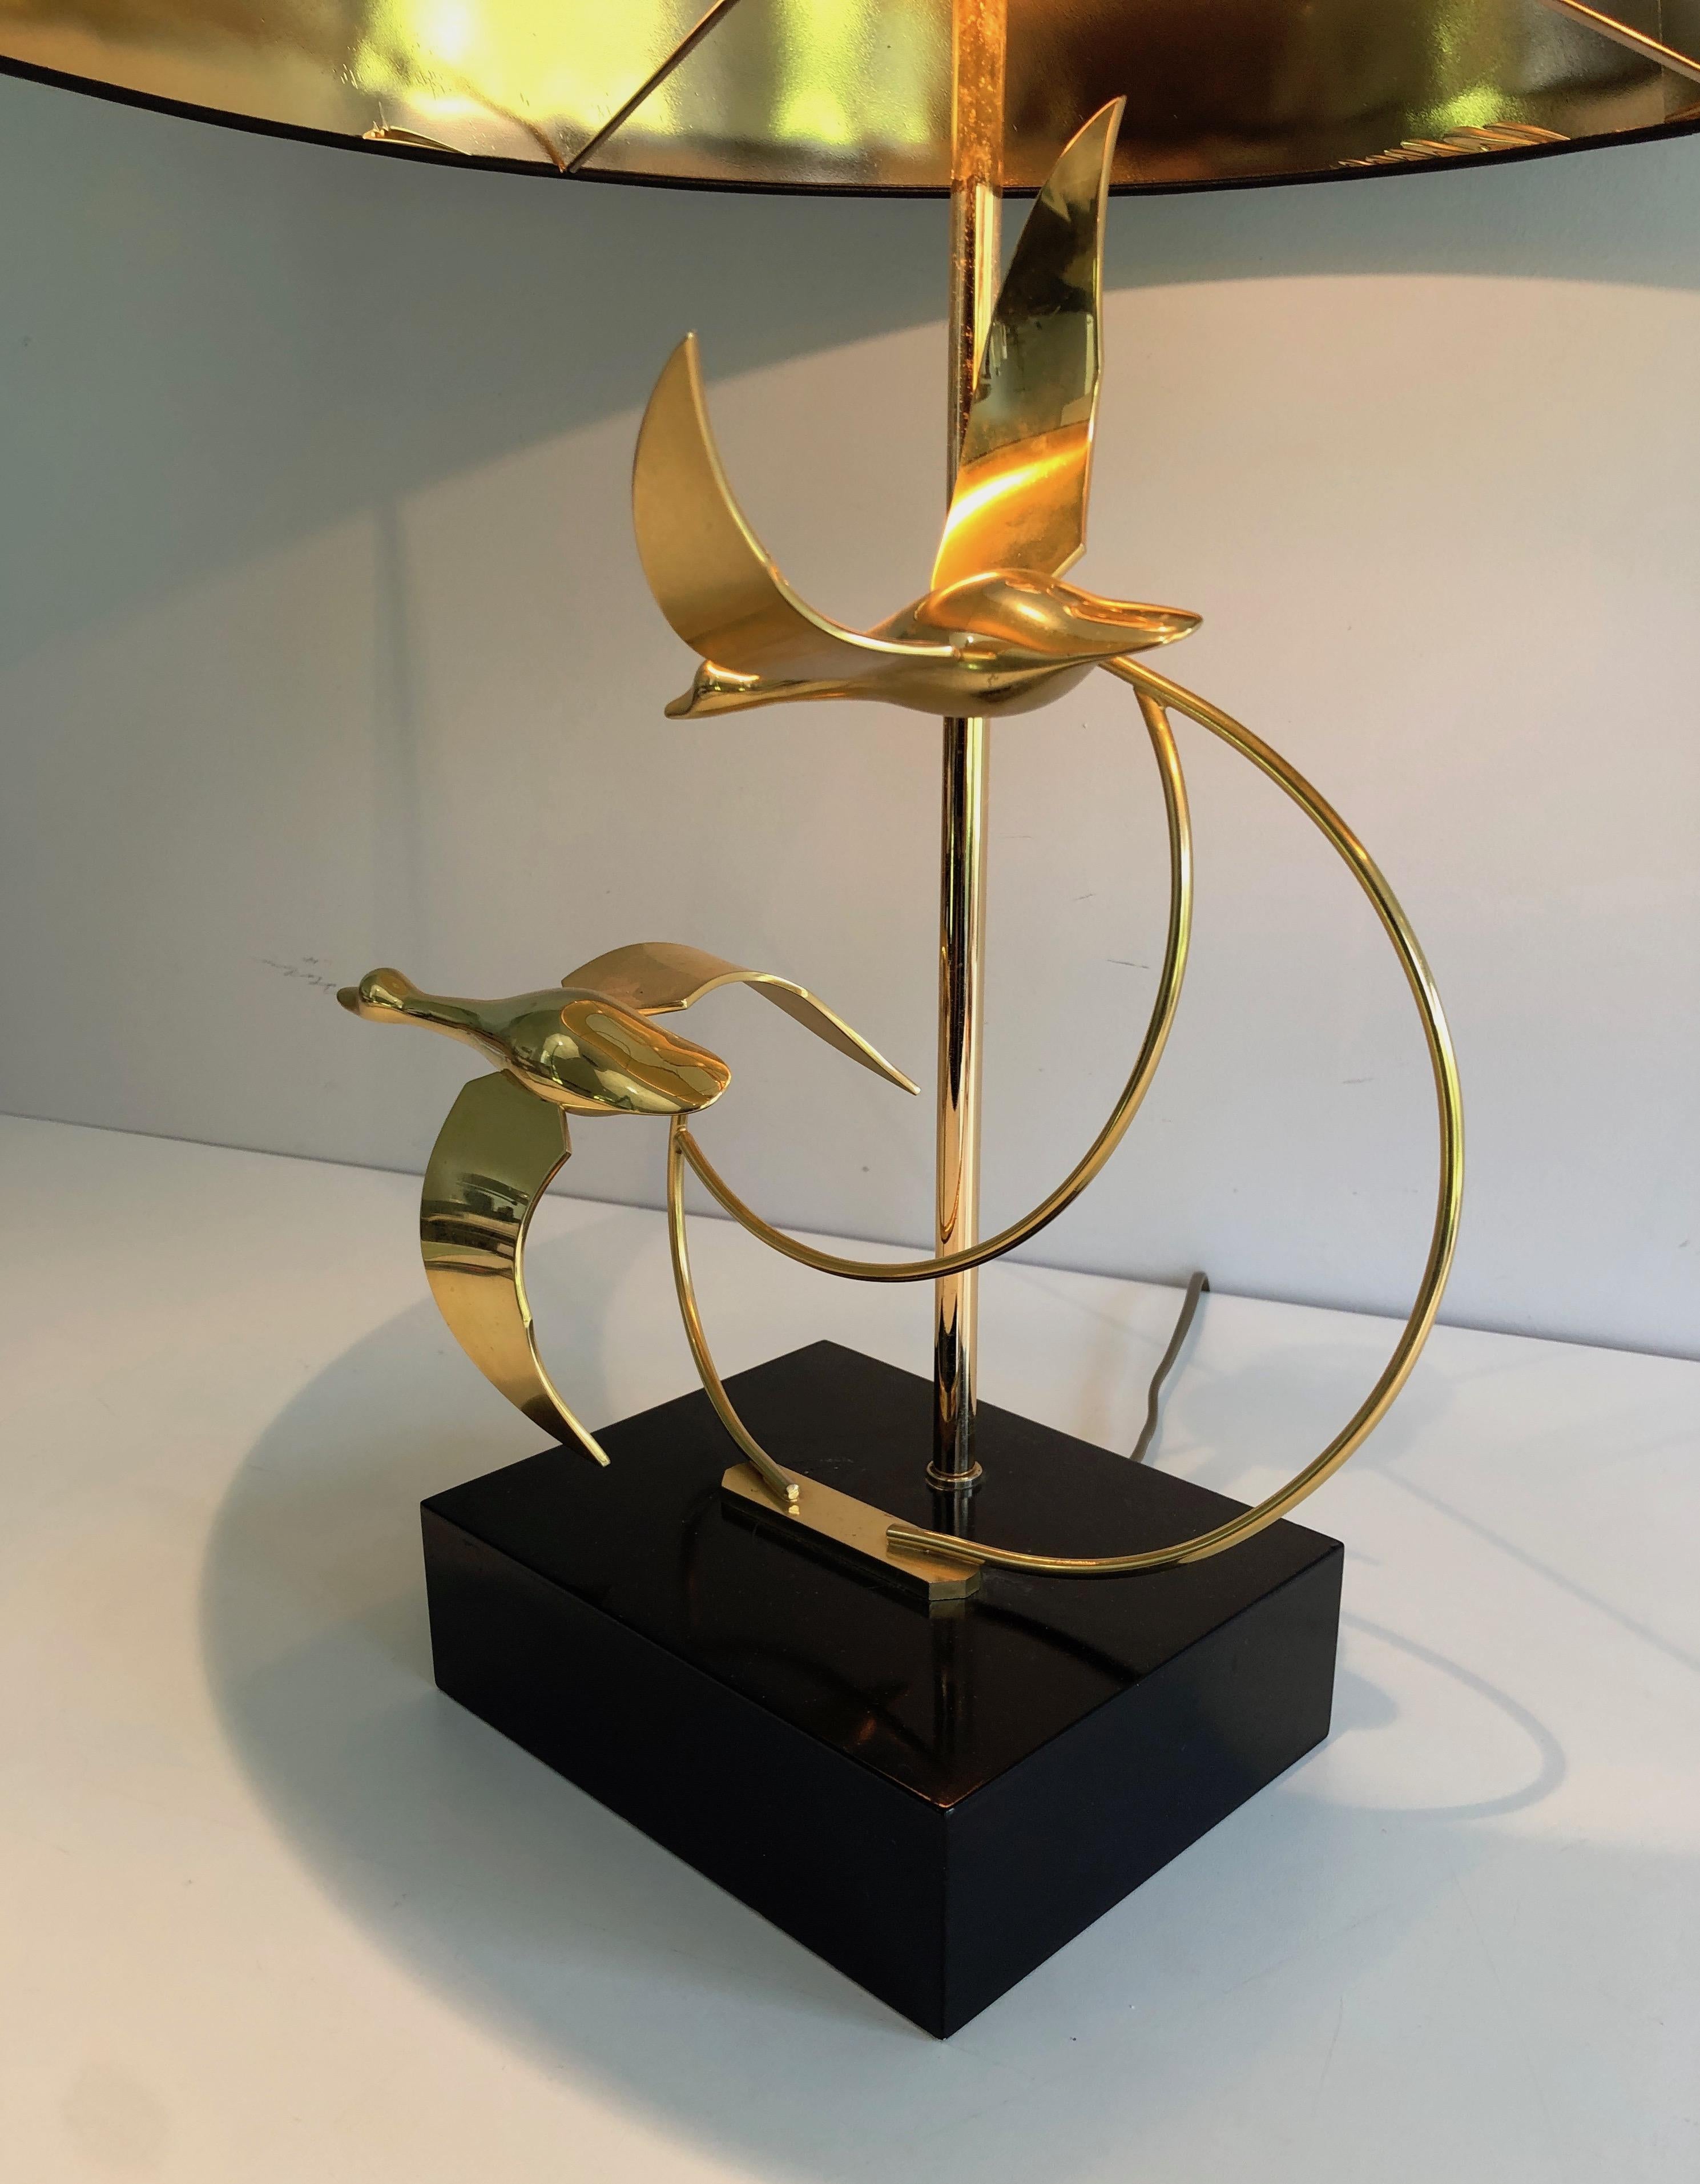 Flock of Wild Geese Brass Table Lamp, French, circa 1970 For Sale 10